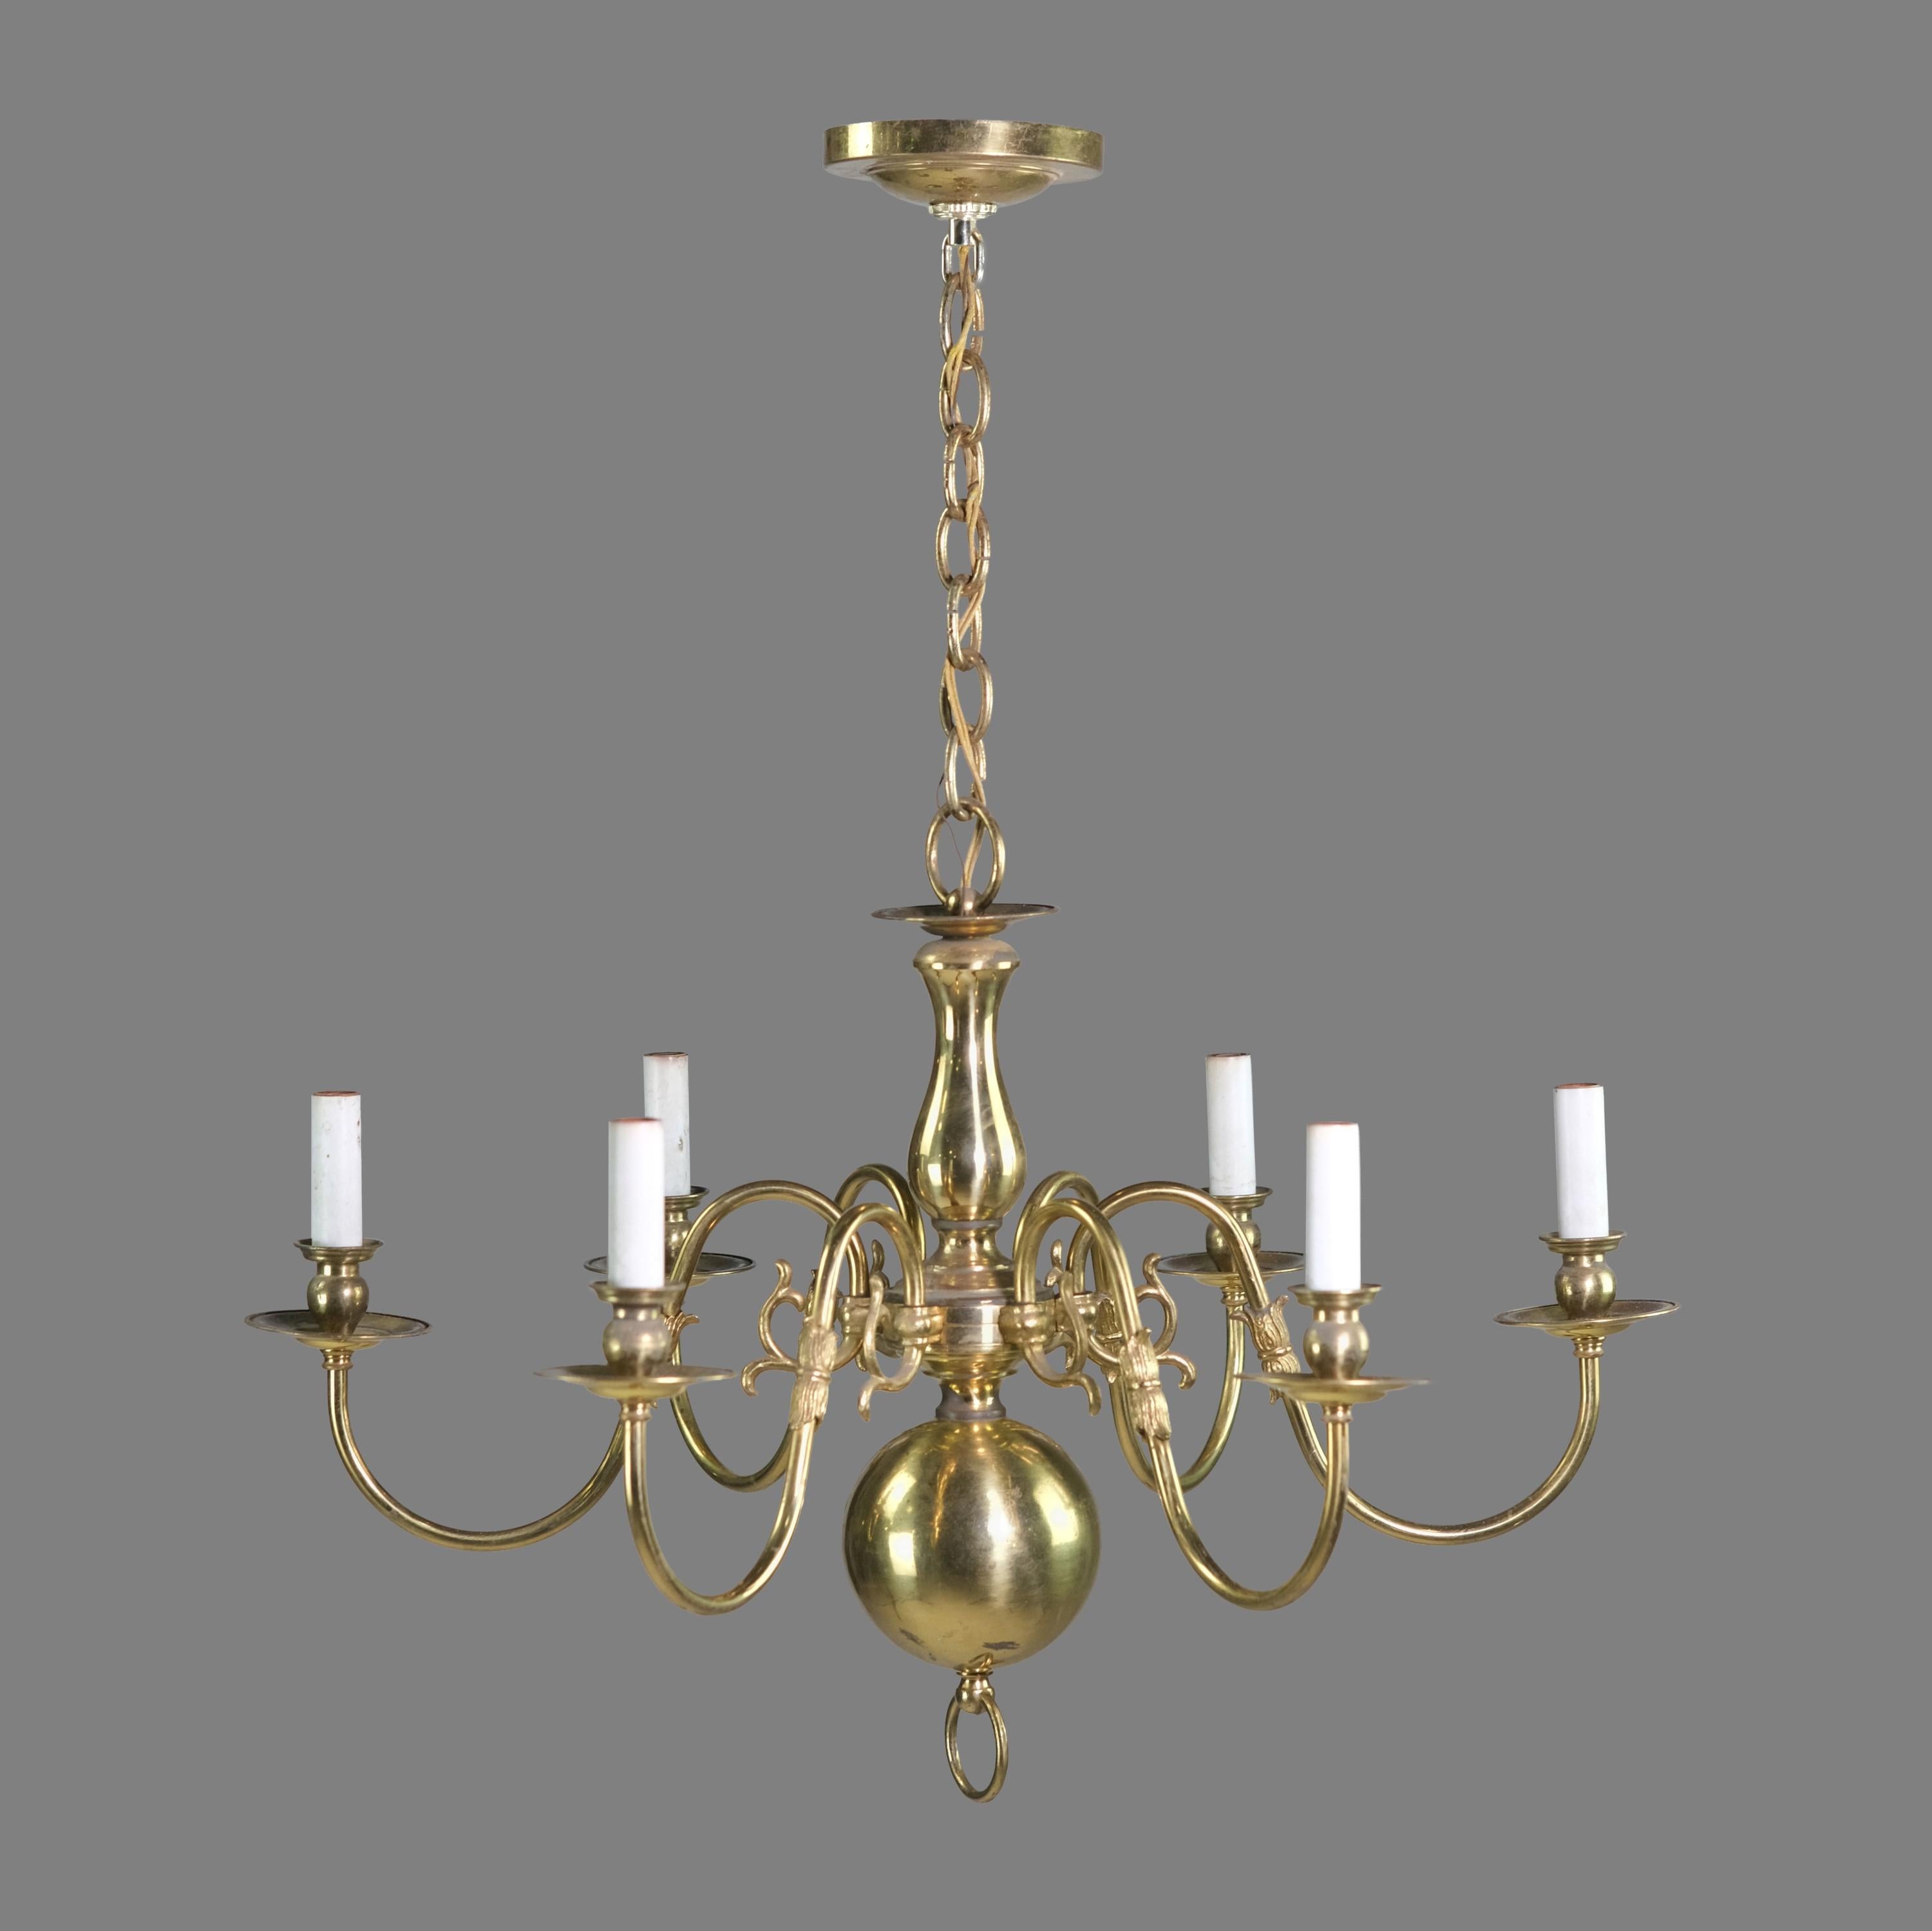 20th century Colonial Williamsburg style chandelier done in a polished finish. Features subtle ornate swirl details on its six arms. Takes six standard household medium base lightbulbs. Cleaned and restored. Please note, this item is located in our